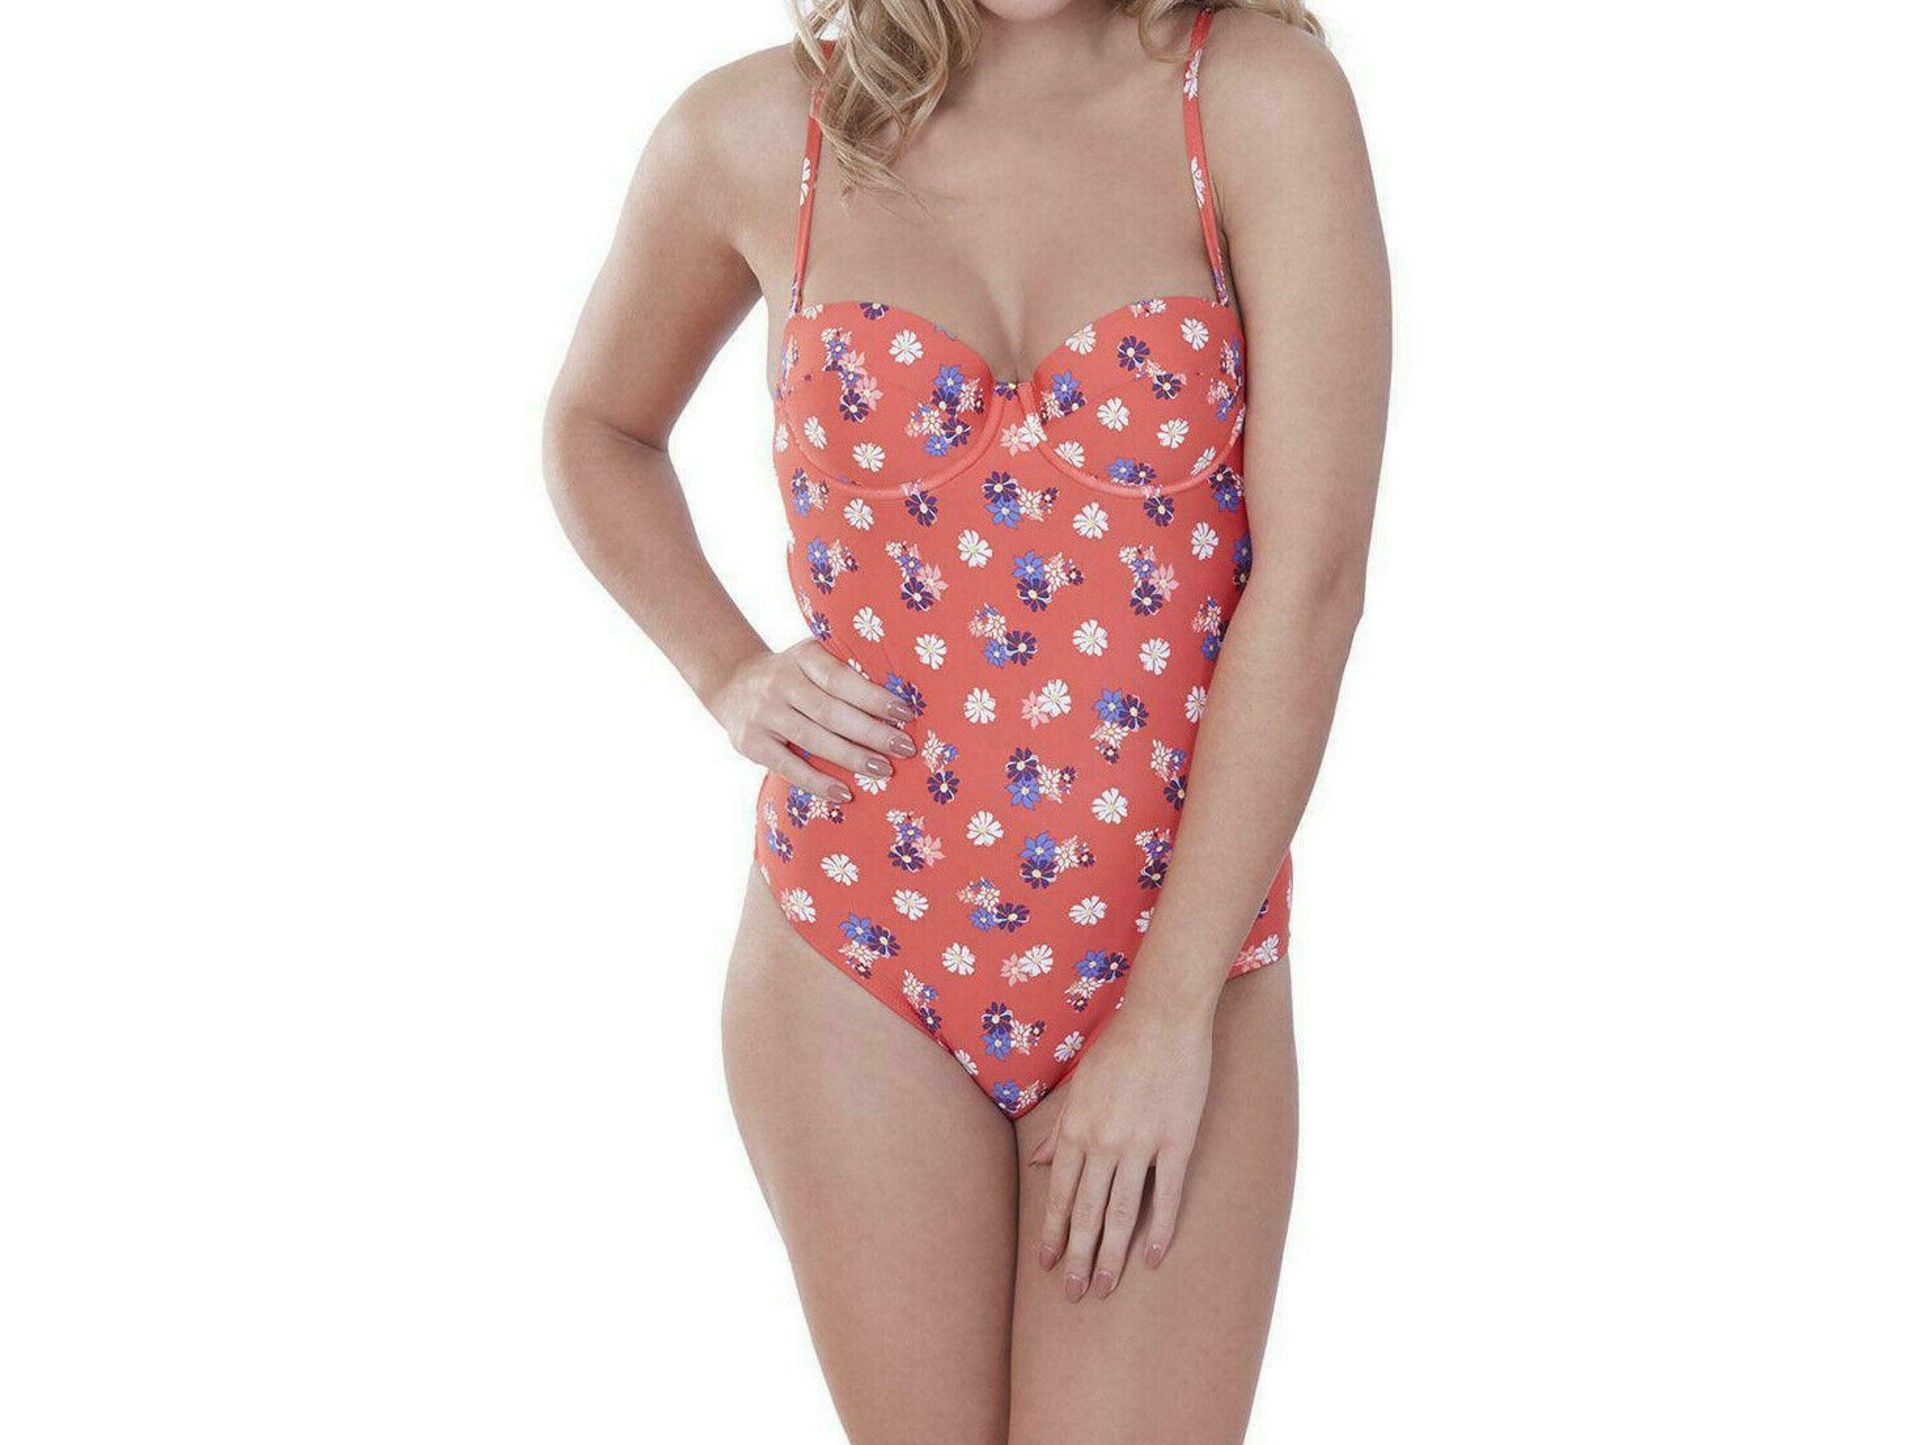 30 X BRAND NEW LEPEL RED SWIMSUITS SIZES 8/10/12/14